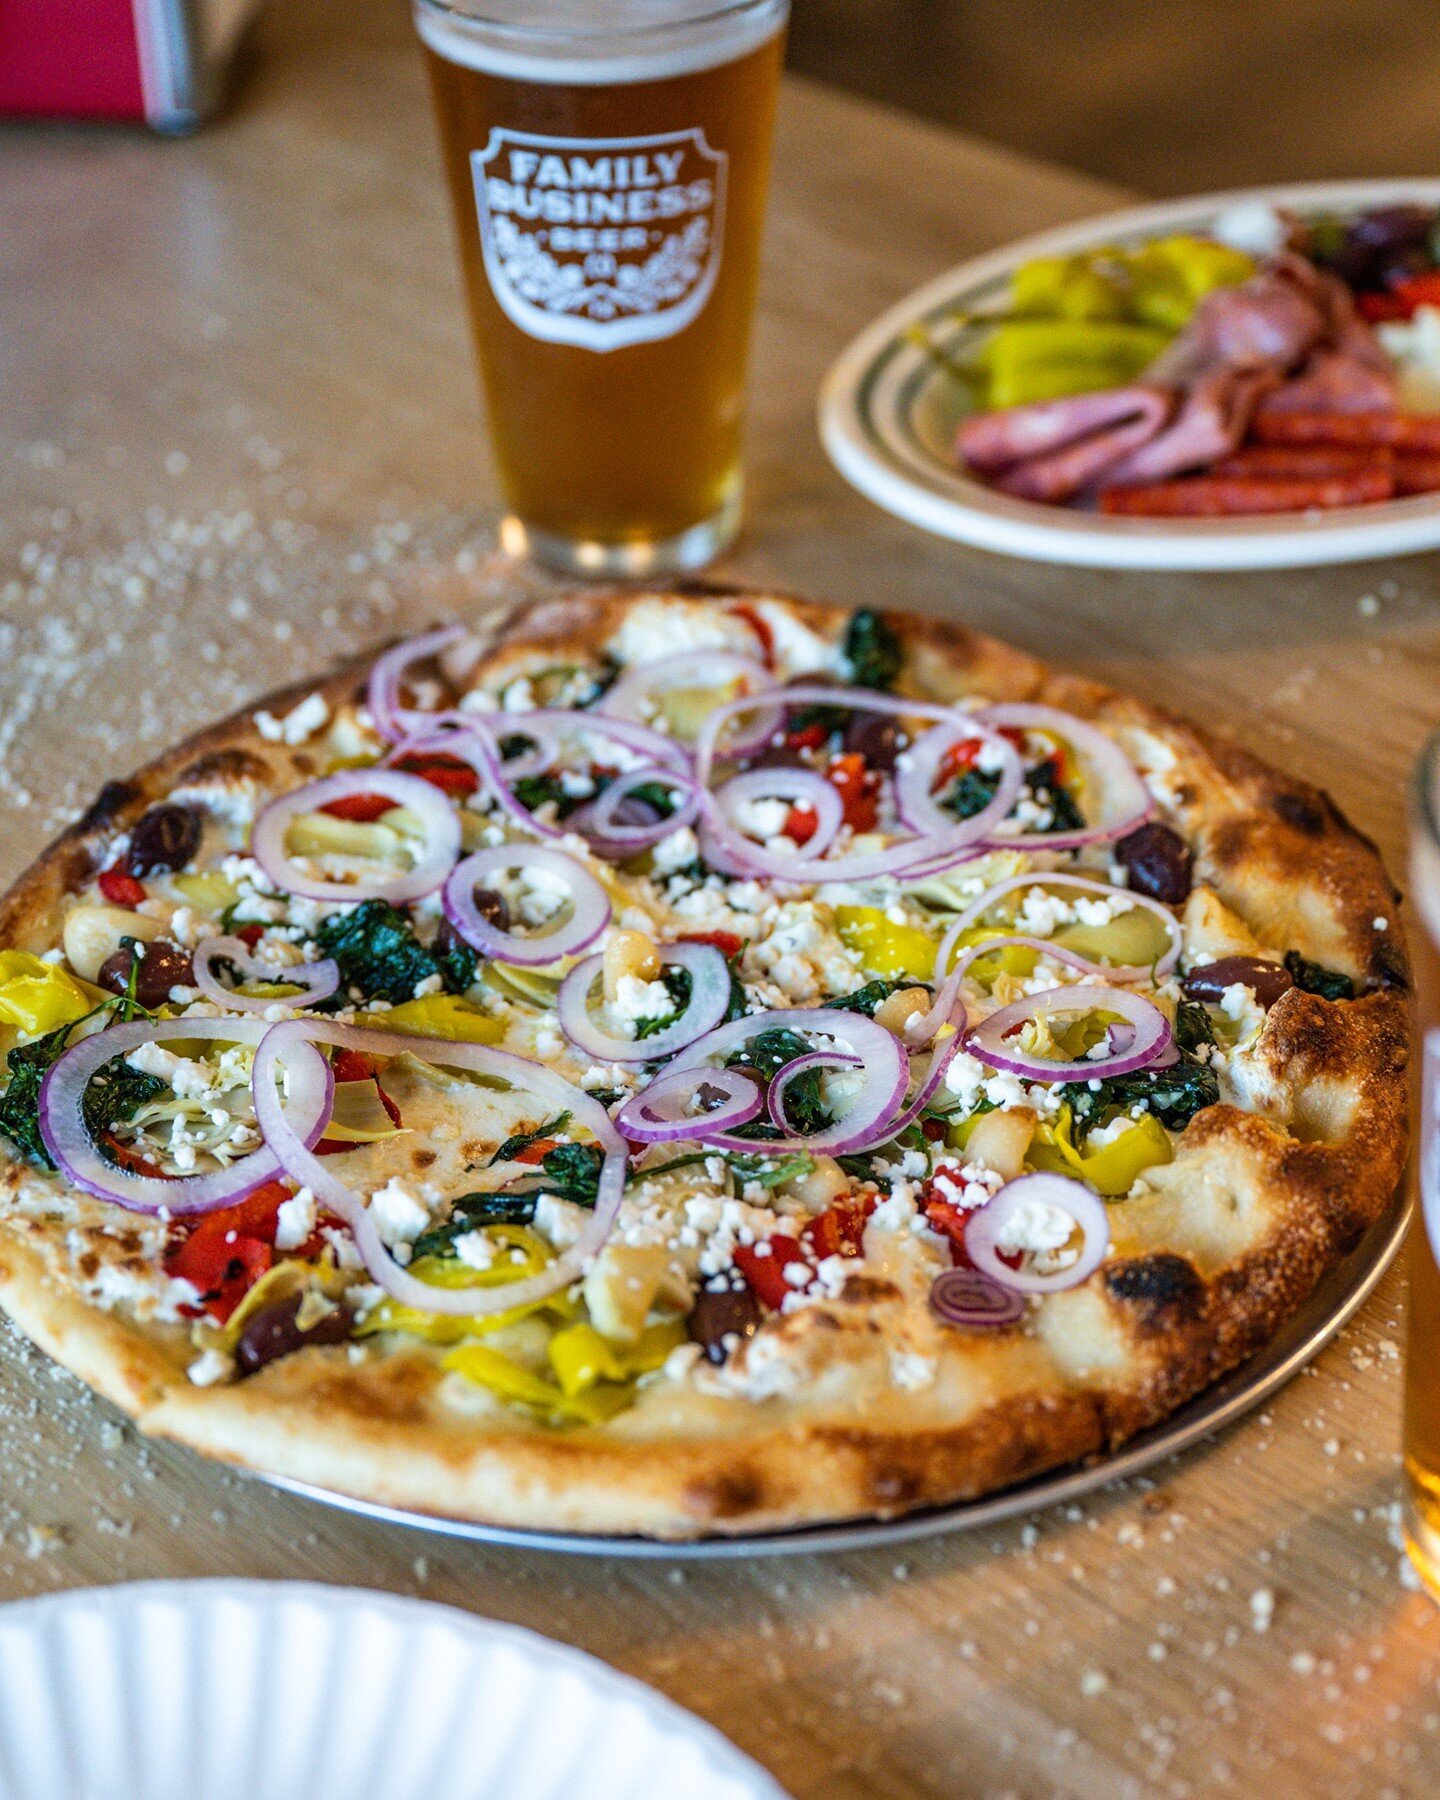 Who needs a summer vacation when we've got the Greek right here!? 😋 Slice into Olive Oil, Mozzarella, Feta Cheese, Shaved Red Onions, Artichoke Hearts, Garlic, Spinach, Fire Roasted Red Pepper, Pepperoncini Peppers, and Kalamata Olives all month lon